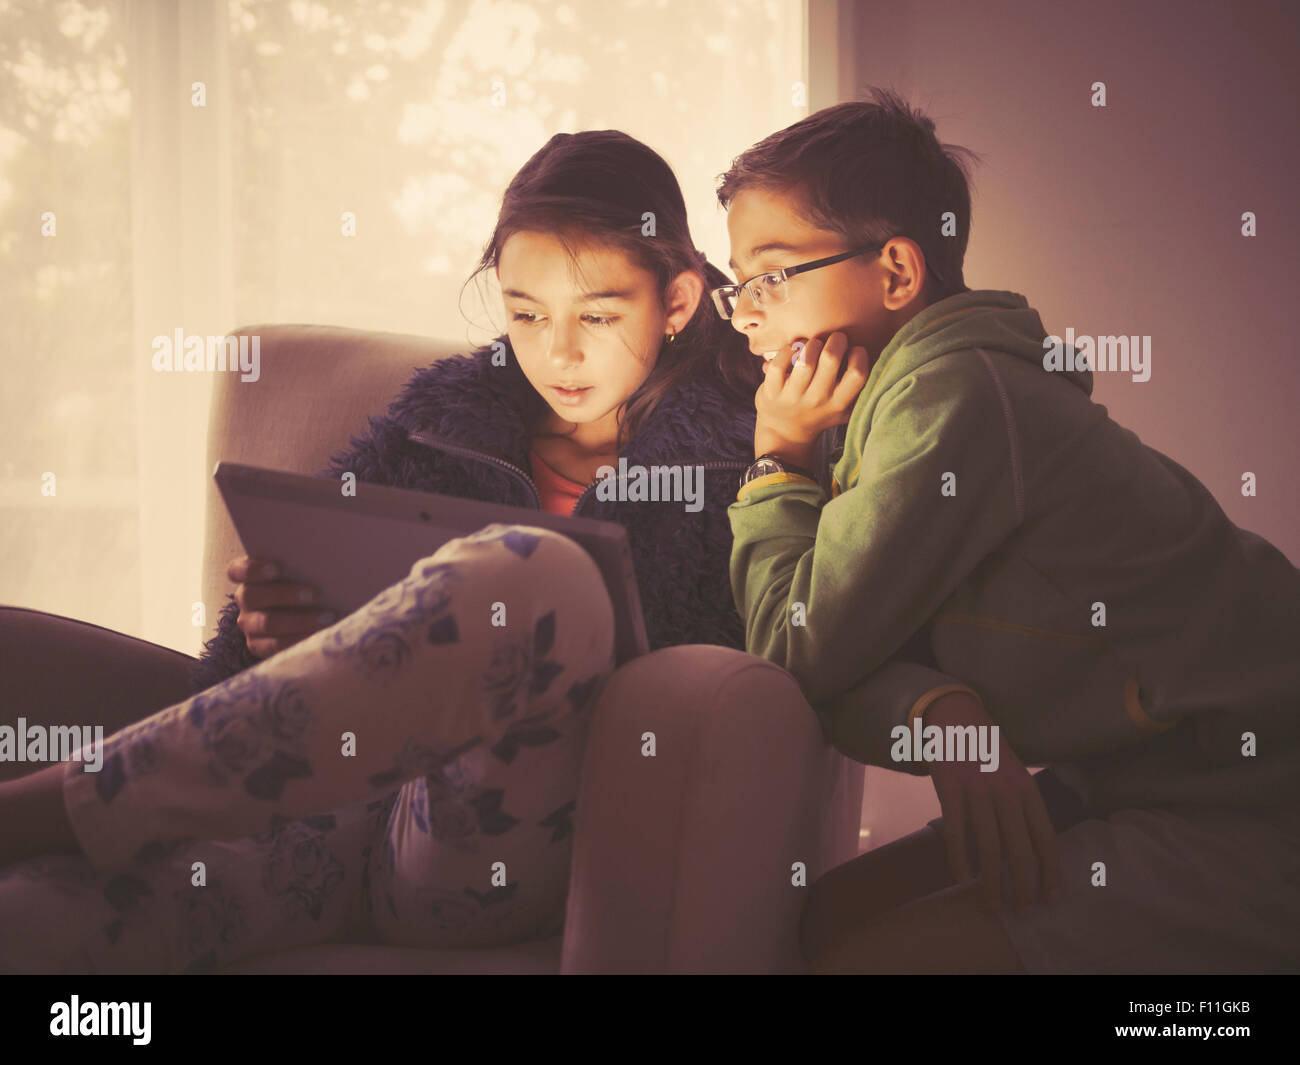 Mixed race children using digital tablet in living room Stock Photo